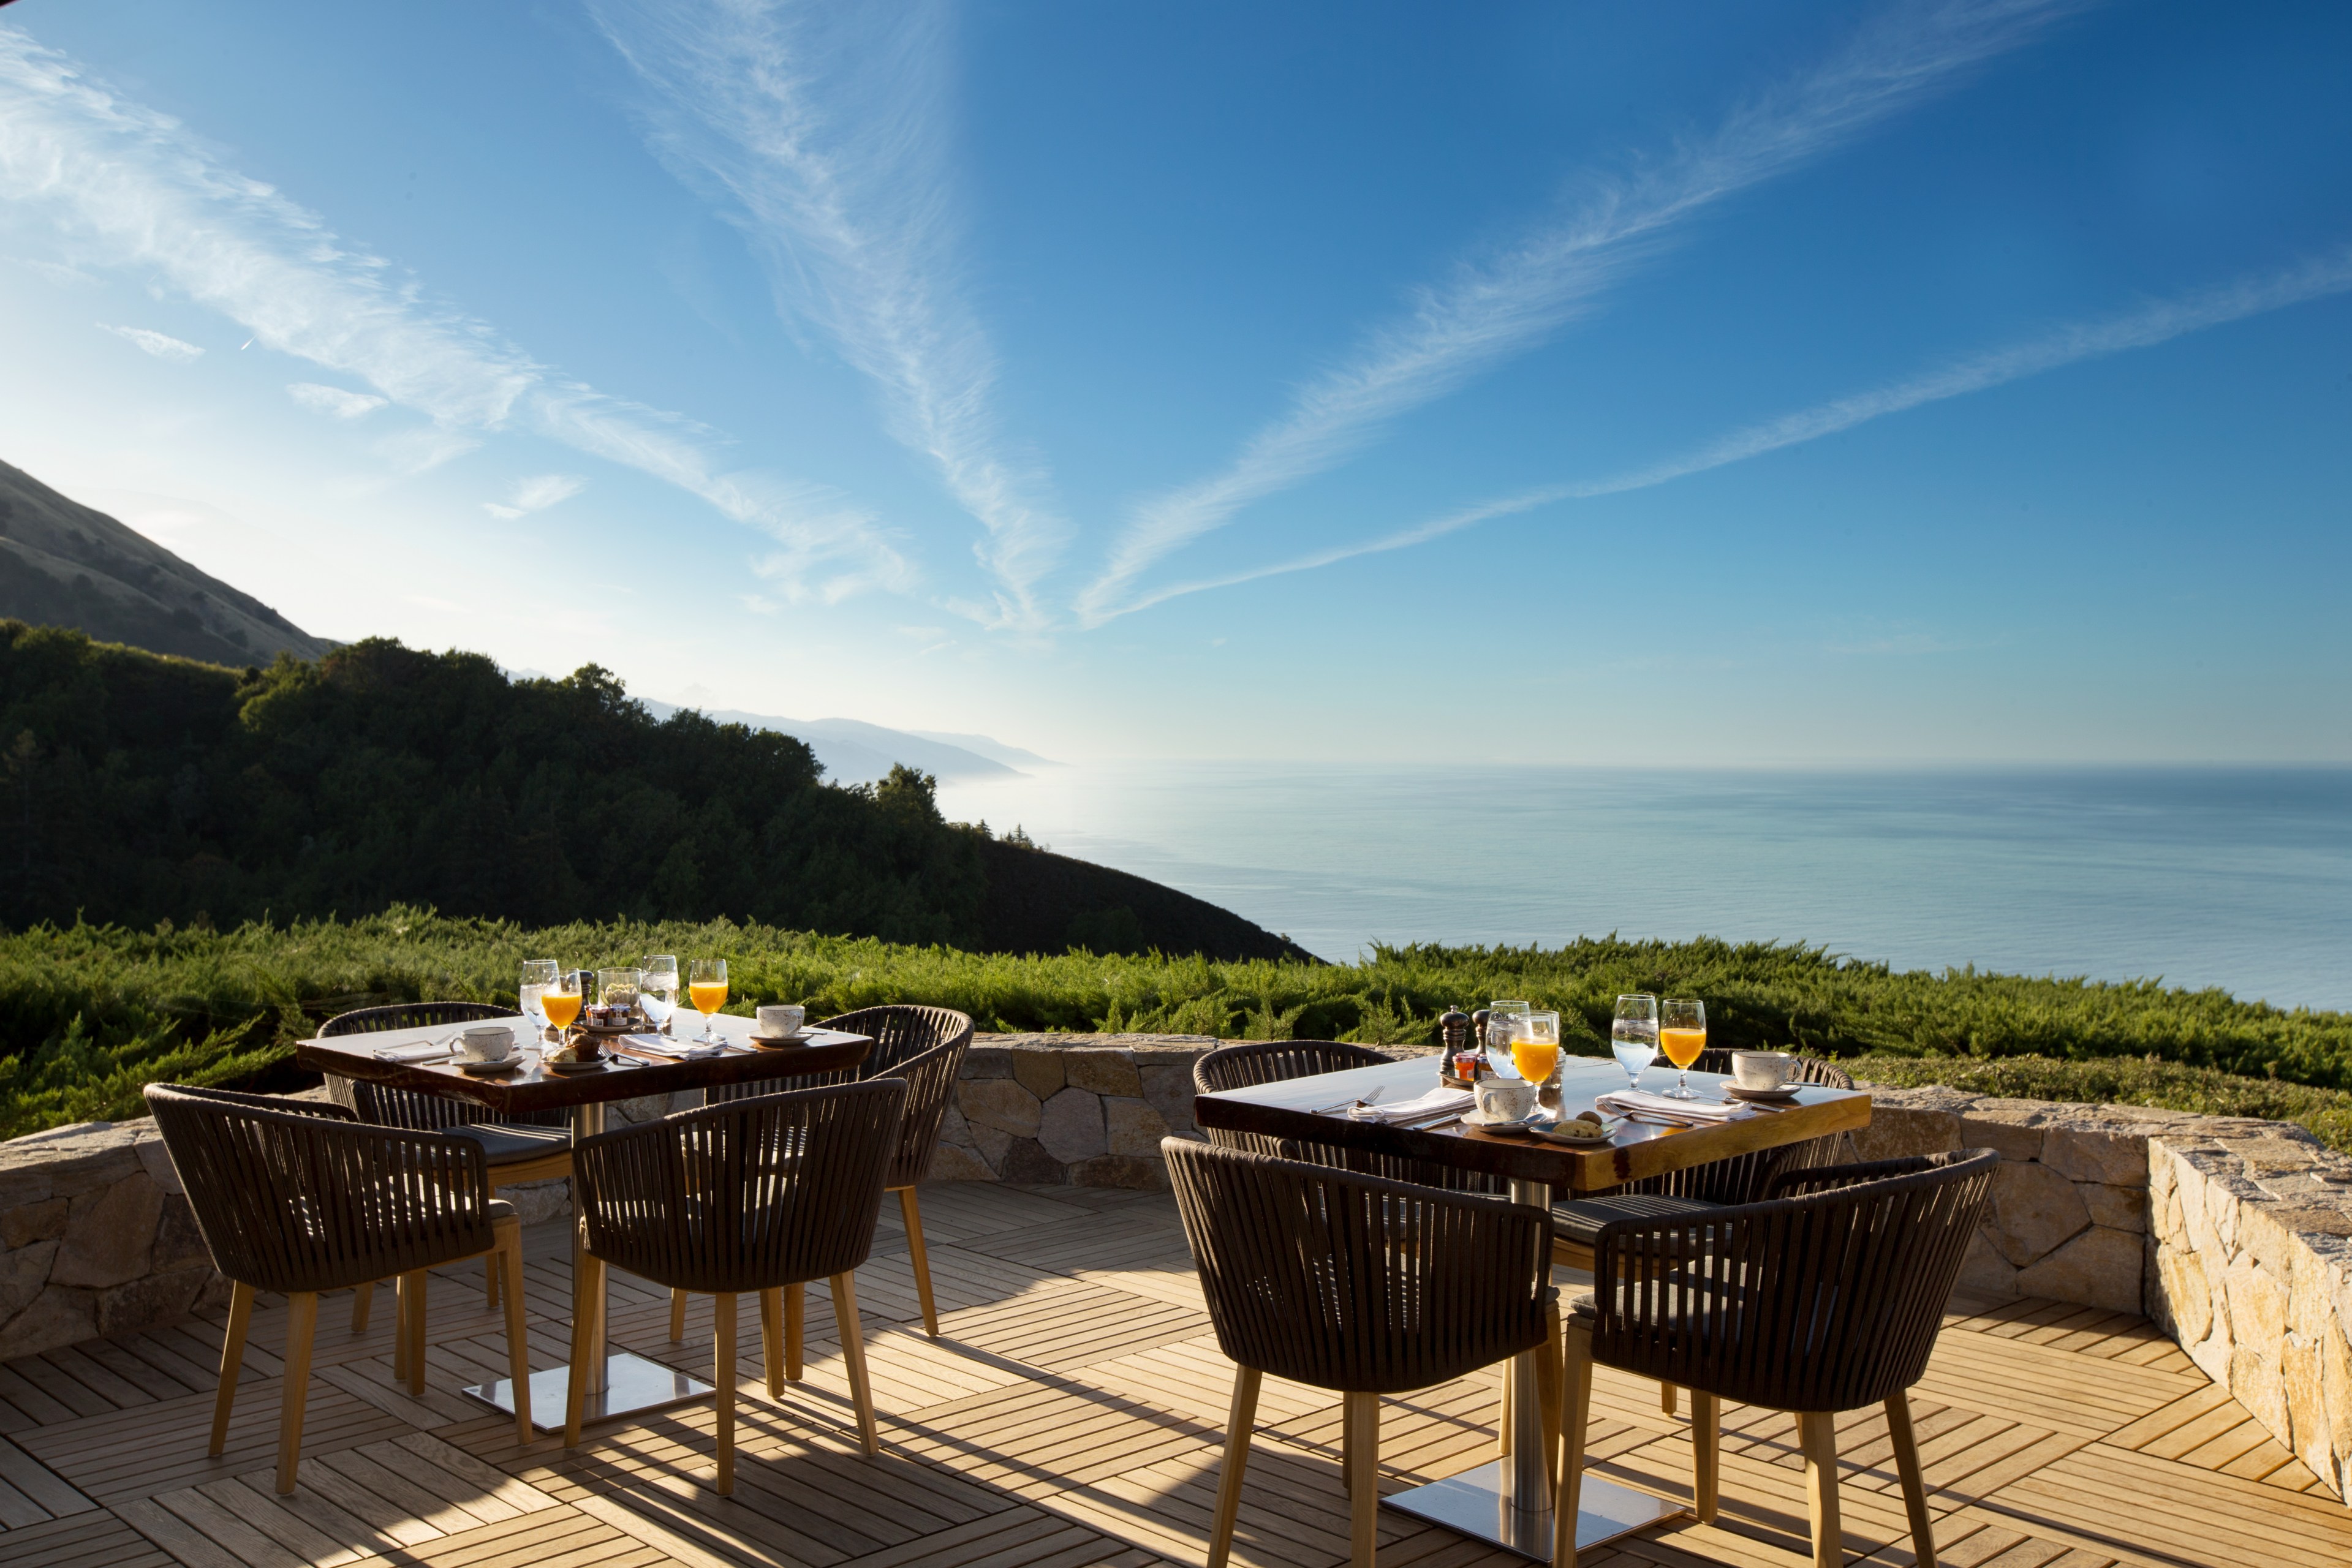 A scenic outdoor dining area overlooks a lush green landscape and a distant sea under a clear blue sky with wispy clouds, with two tables set for breakfast.